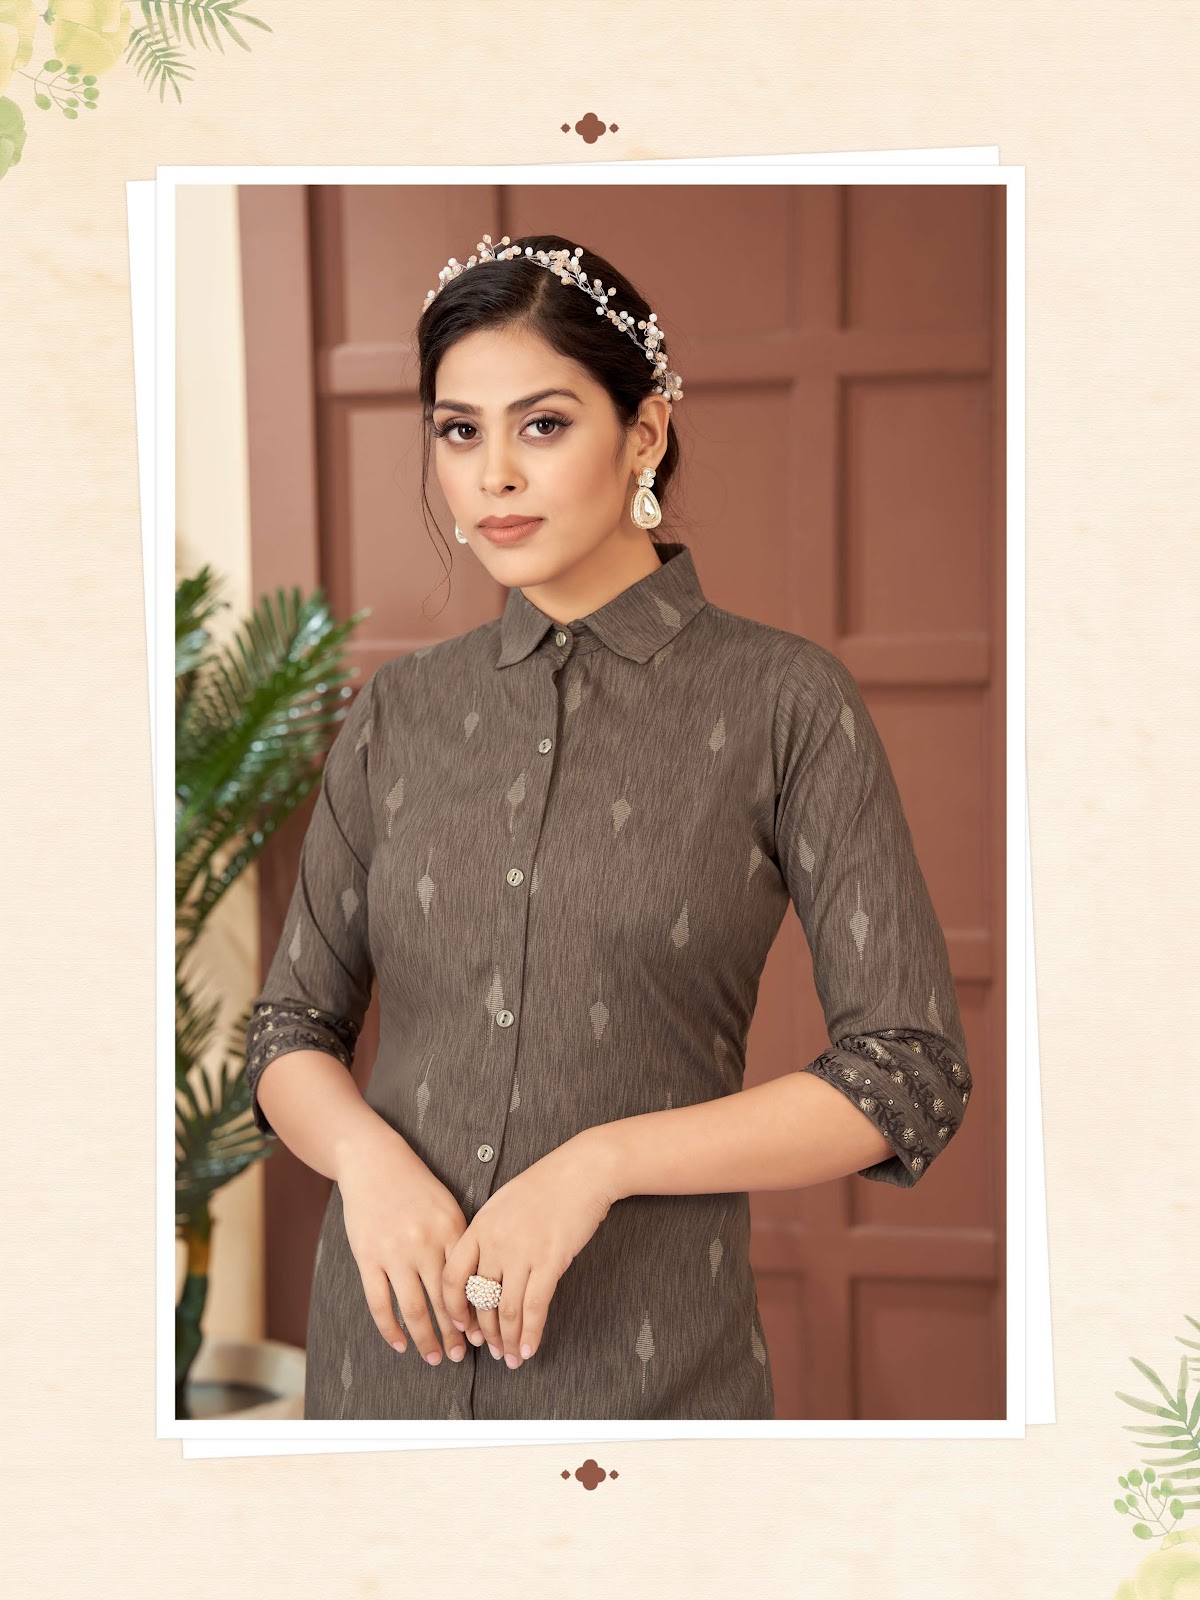 Floral Fiesta Cotton Printed Shirt Style Kurti for Everyday wear